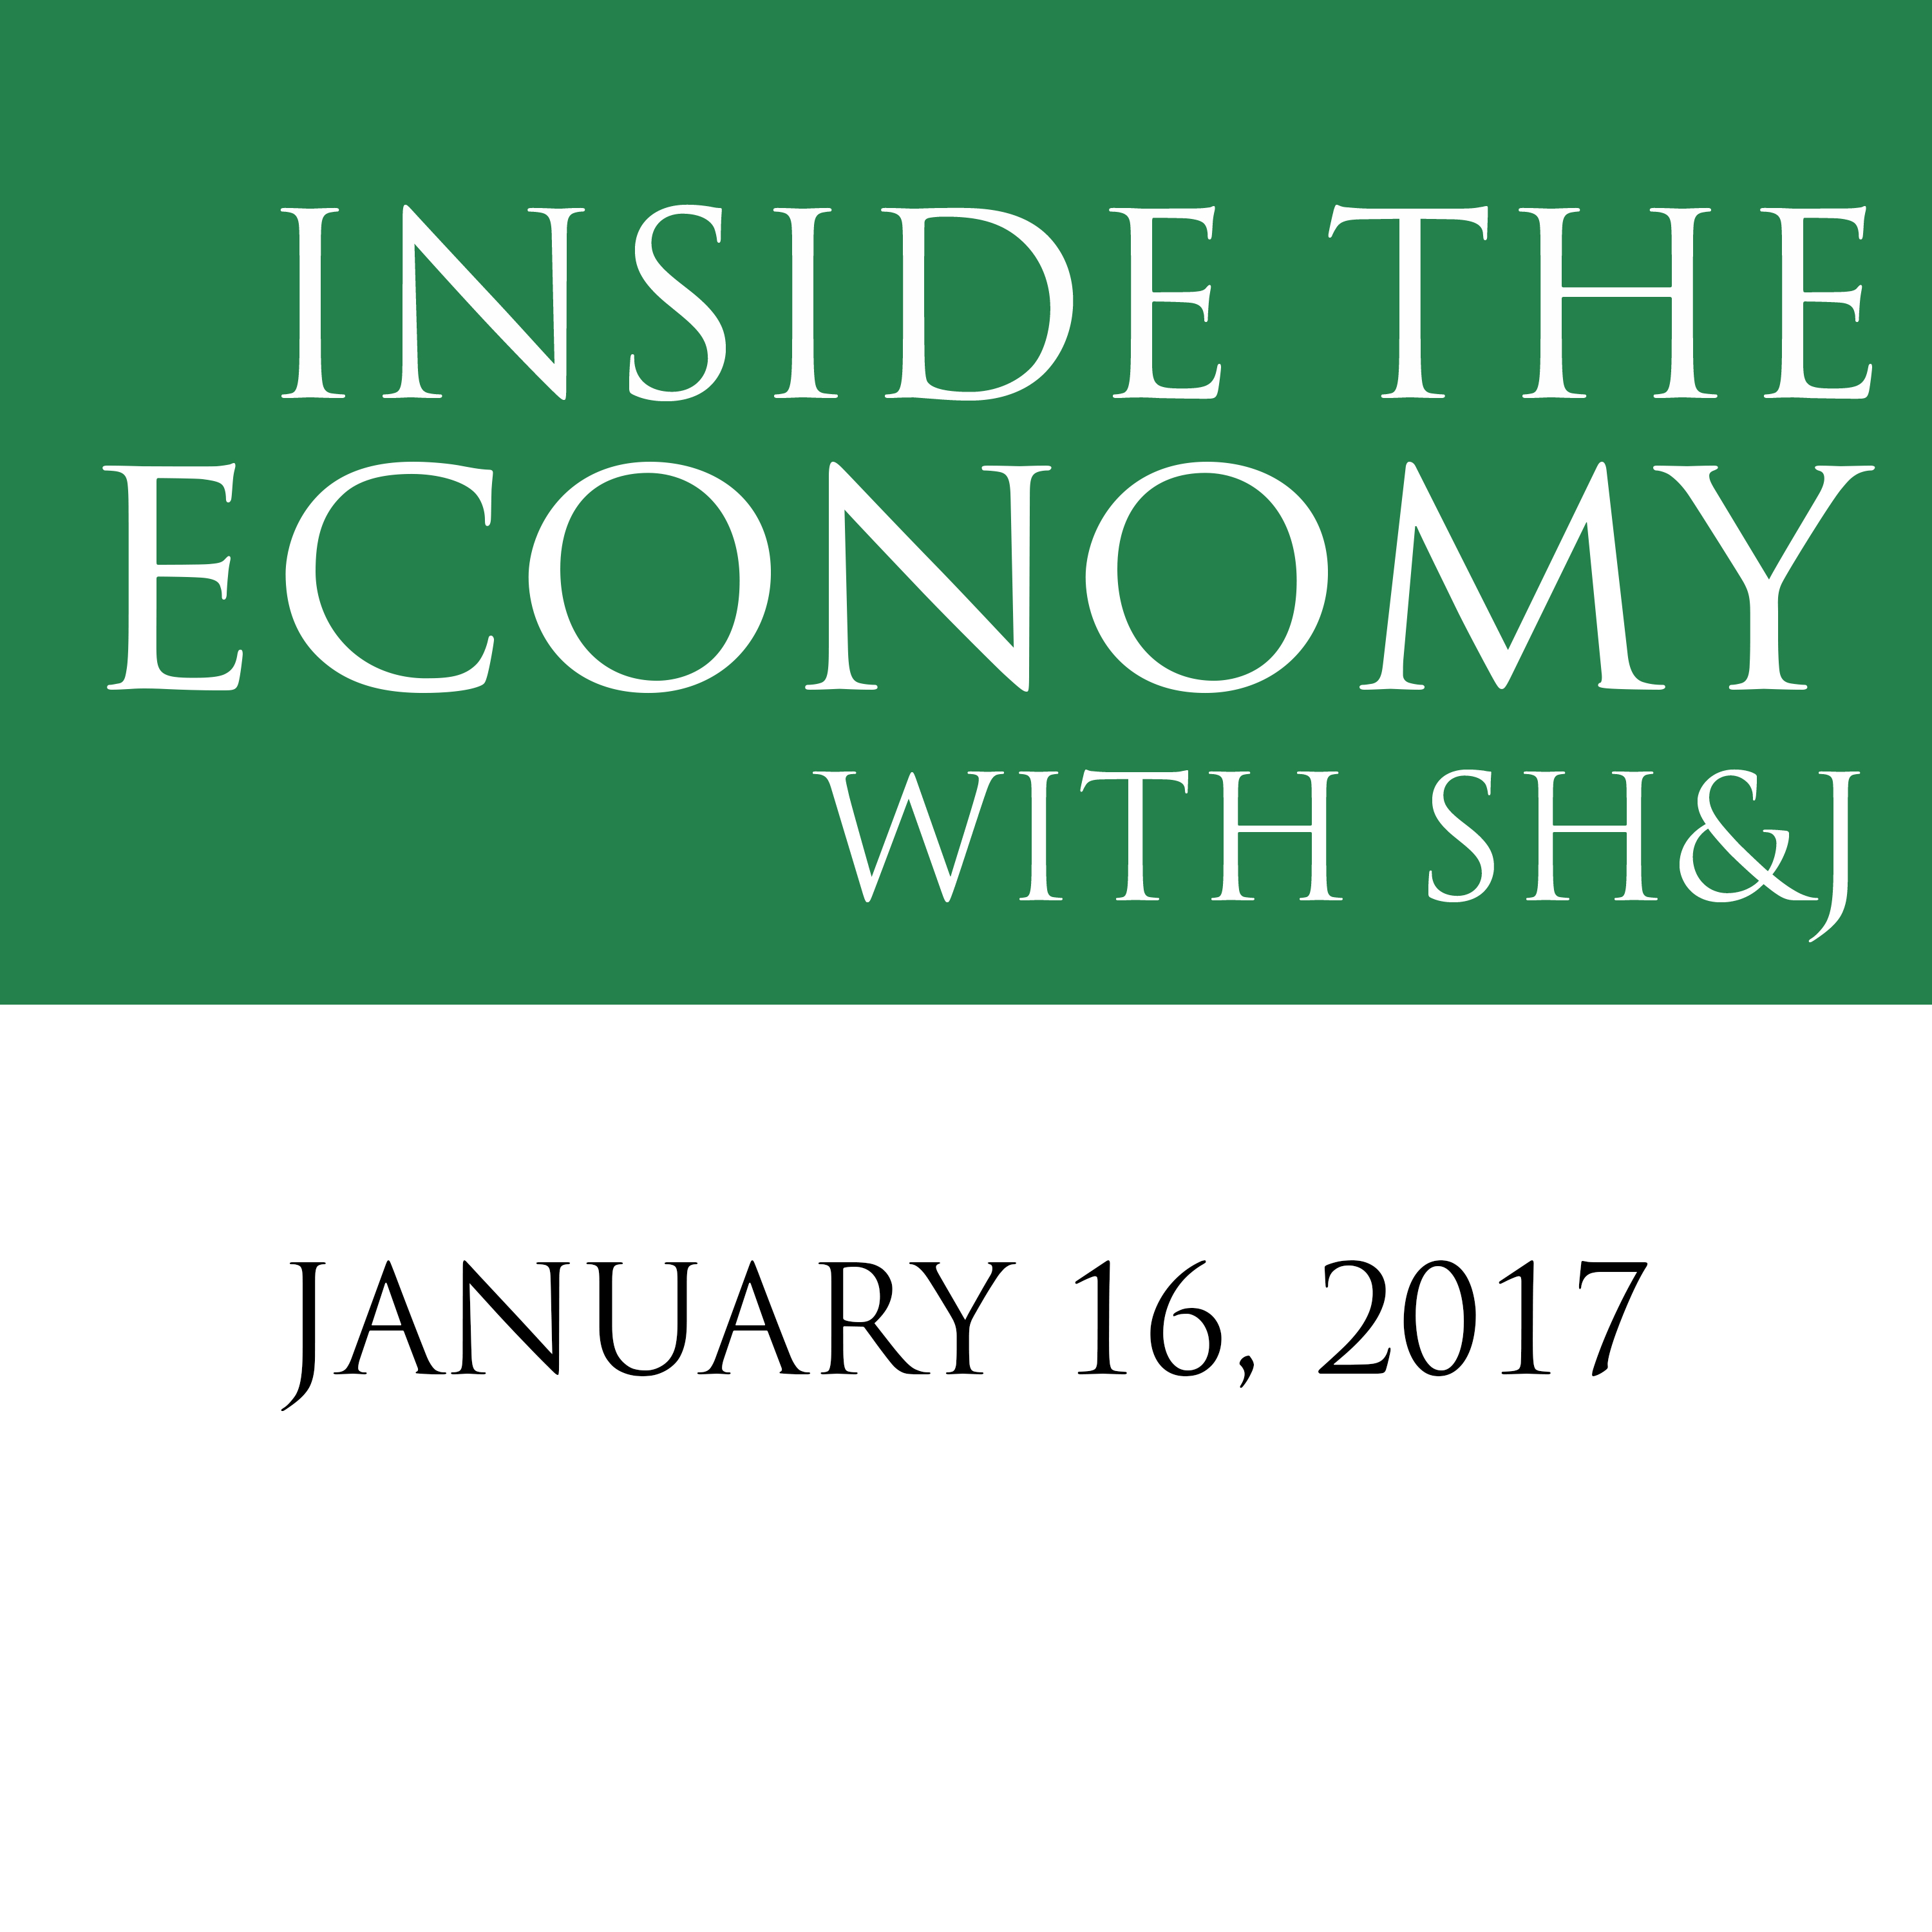 January 16, 2017  --  Inside the Economy with SH&J